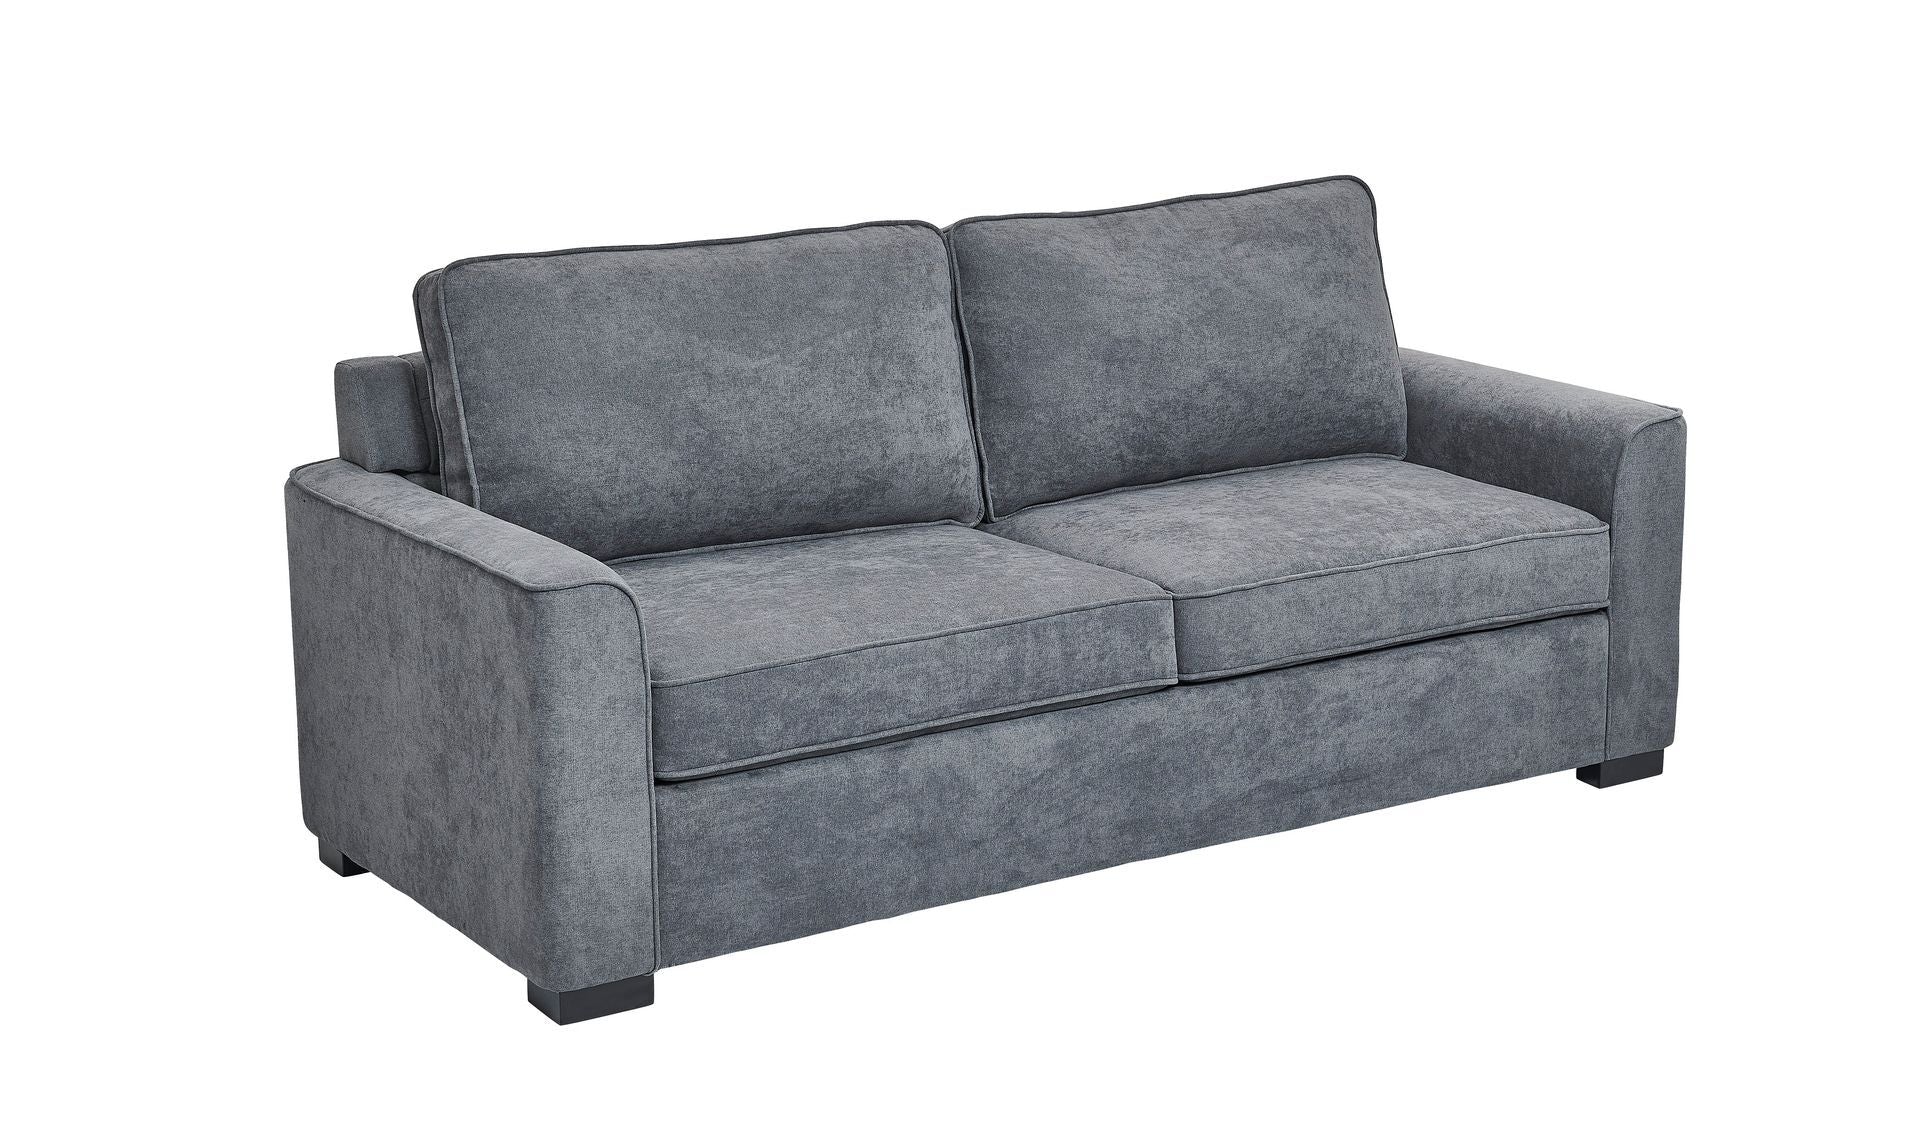 Misty 2 Seater Sofa Bed- Queen Size